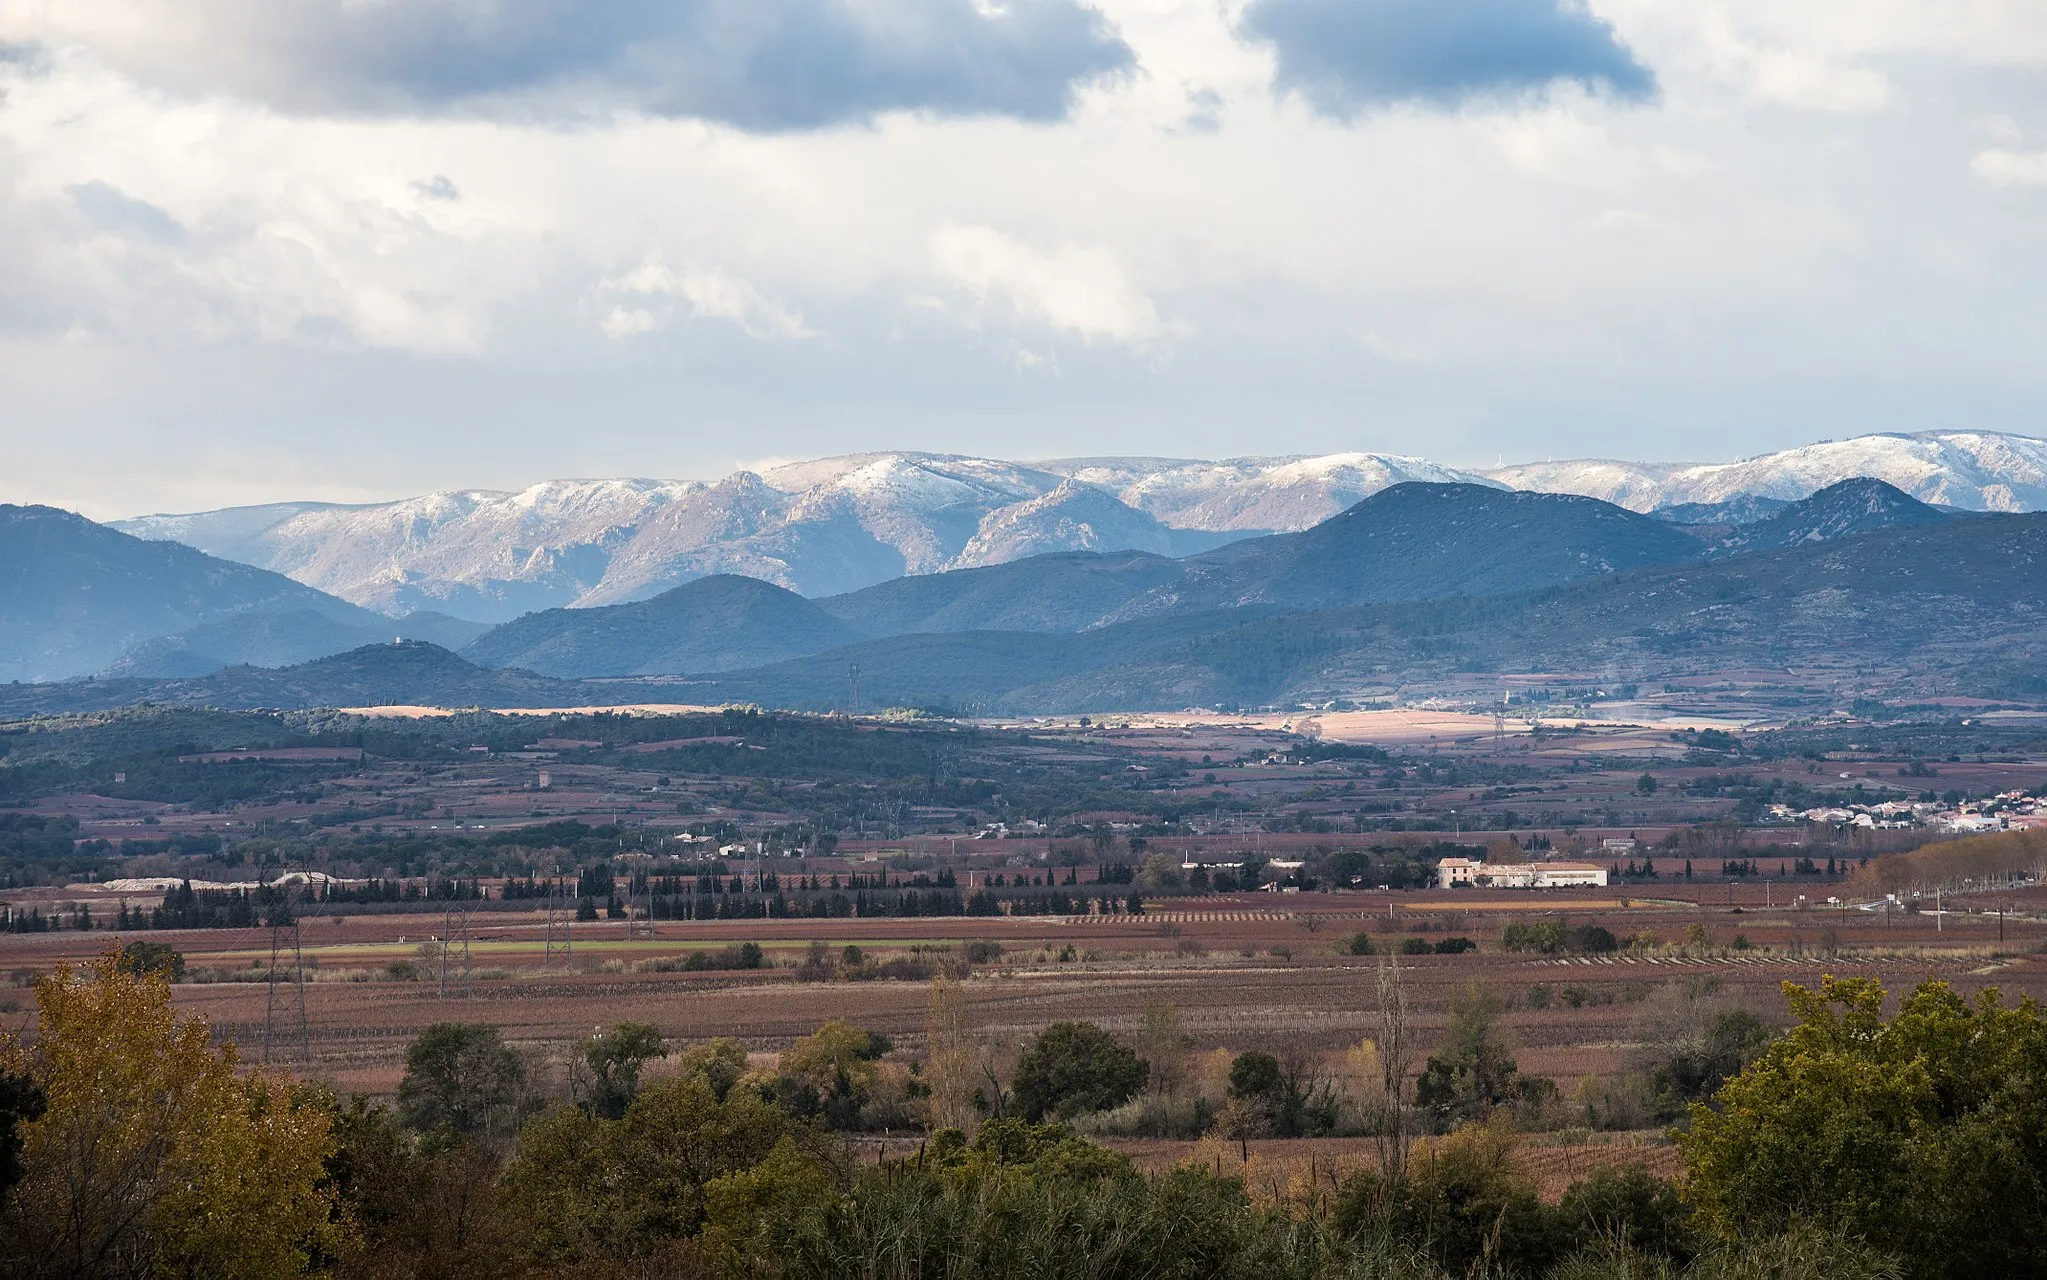 Photo showing: The "Montagne Noire" (Black Mountain) and a part of the commune of Thézan-lès-Béziers from the Southeast in the commune of Corneilhan, Hérault, France.